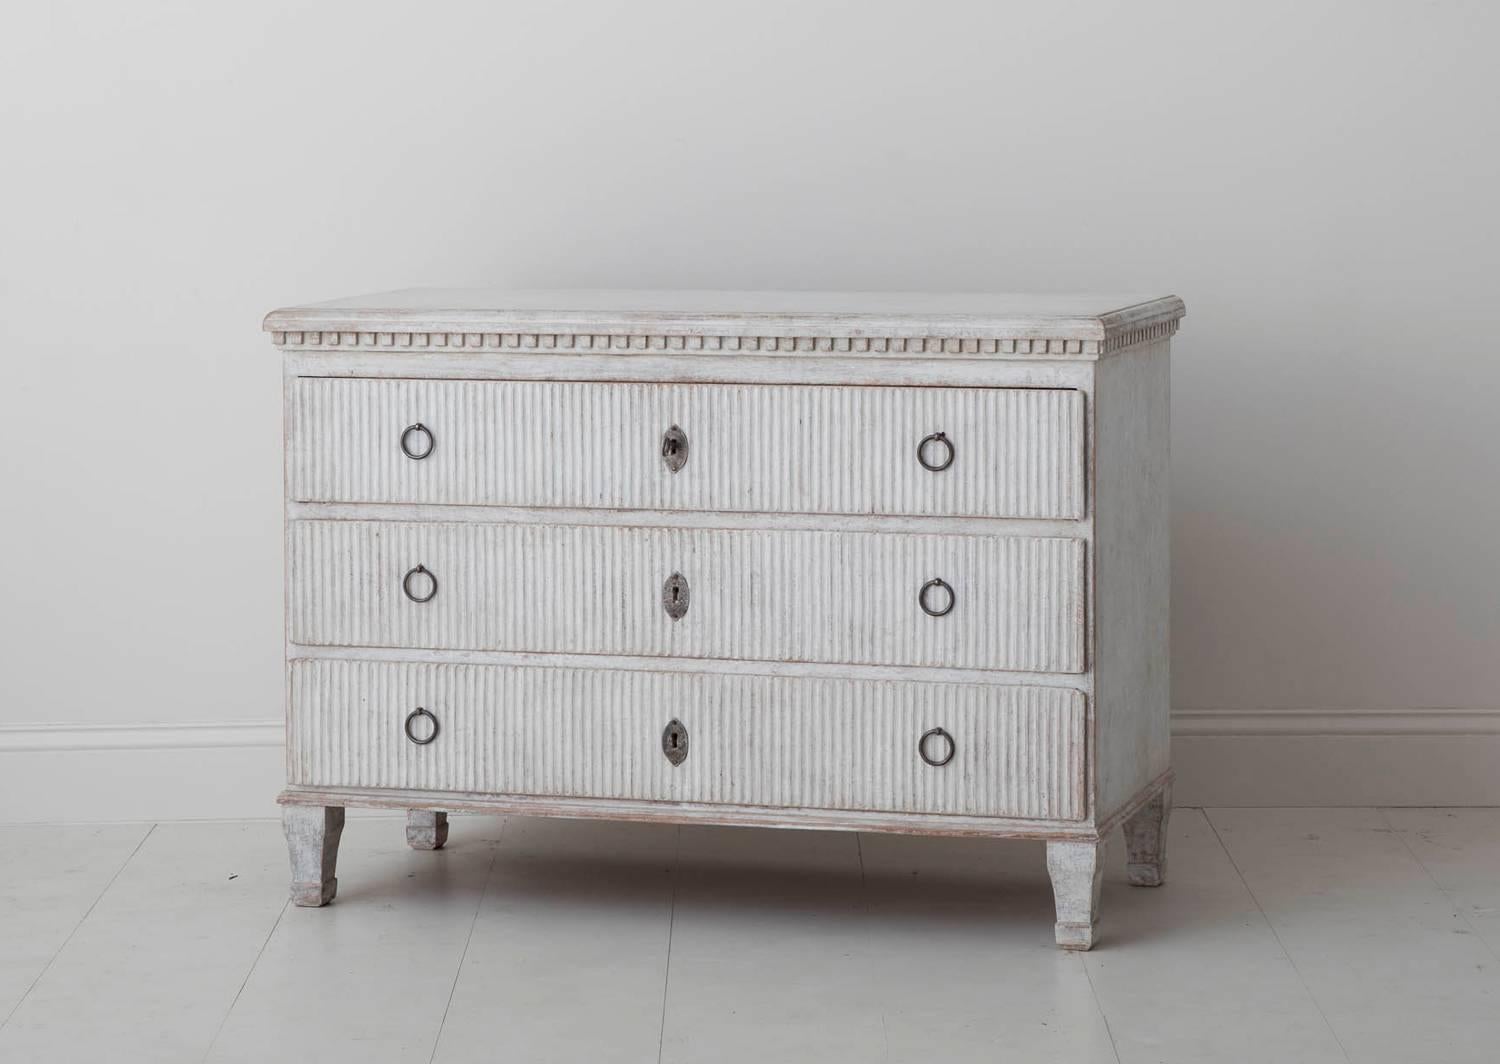 A charming late Gustavian period commode with reeded drawer fronts and dental molding framing the top. Original locks and hardware. The patina is a complex blend of aged white and soft gray with natural wood showing through in some areas.